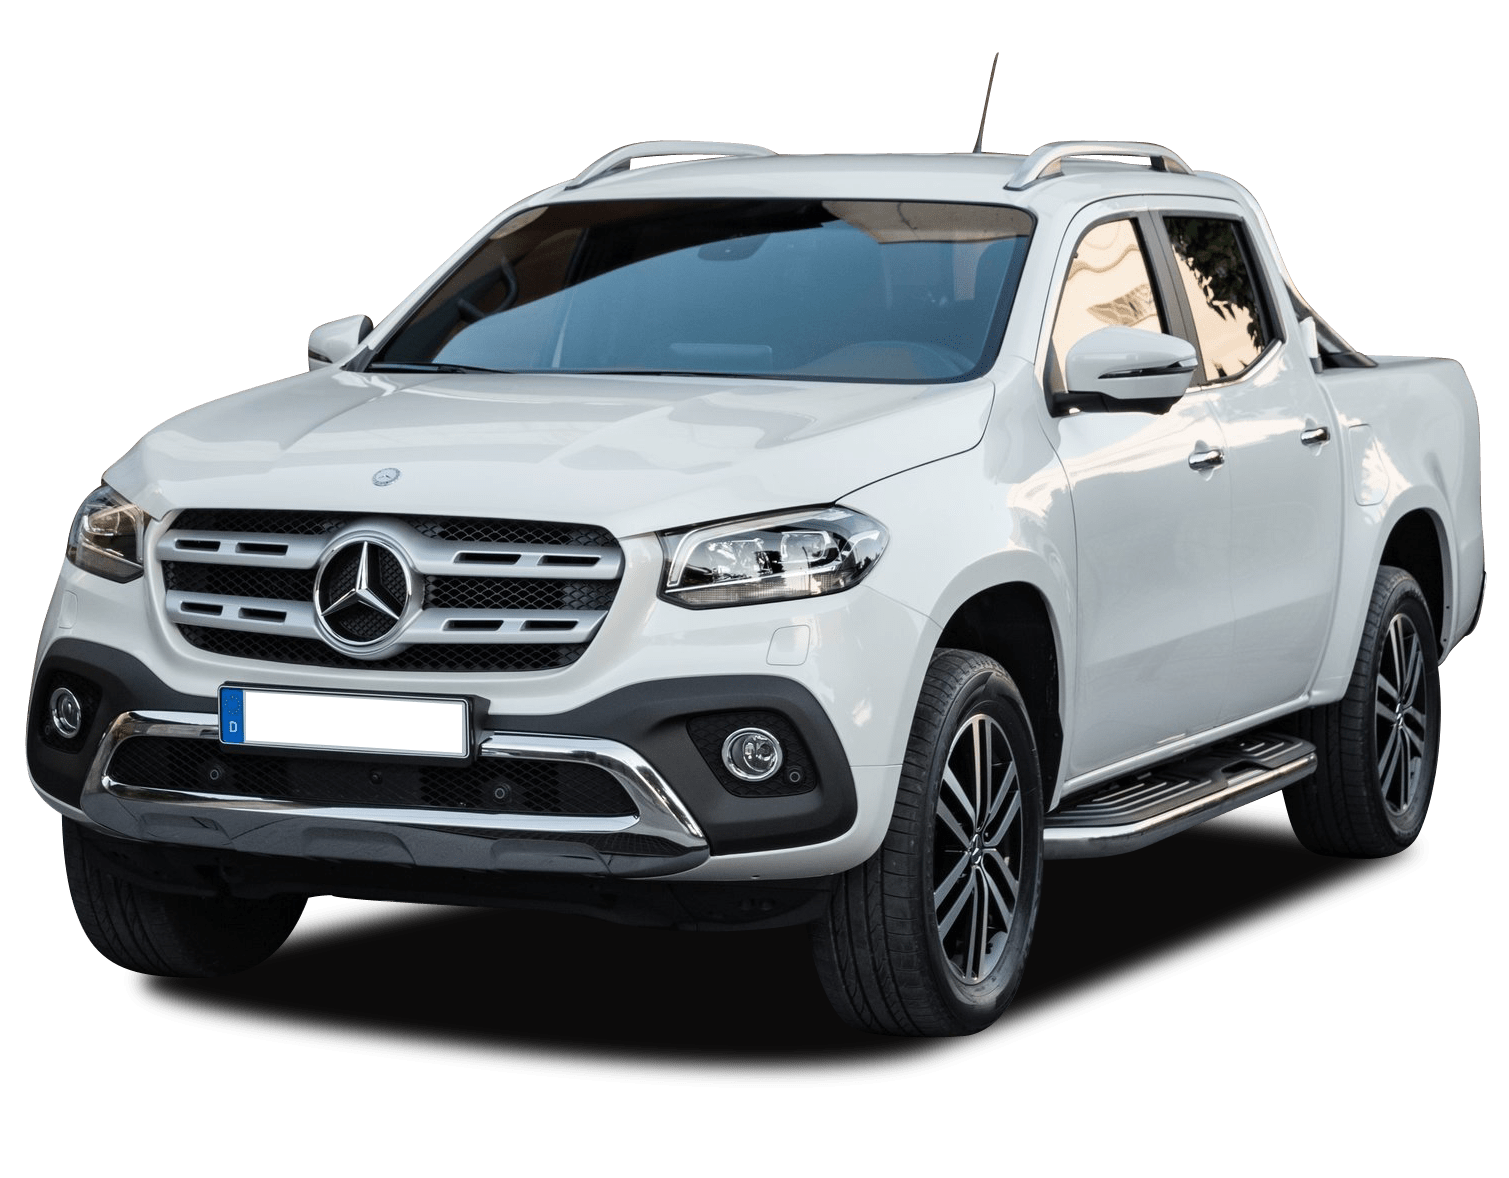 This Custom Mercedes XClass Pickup Is Extravagance On 6 Wheels